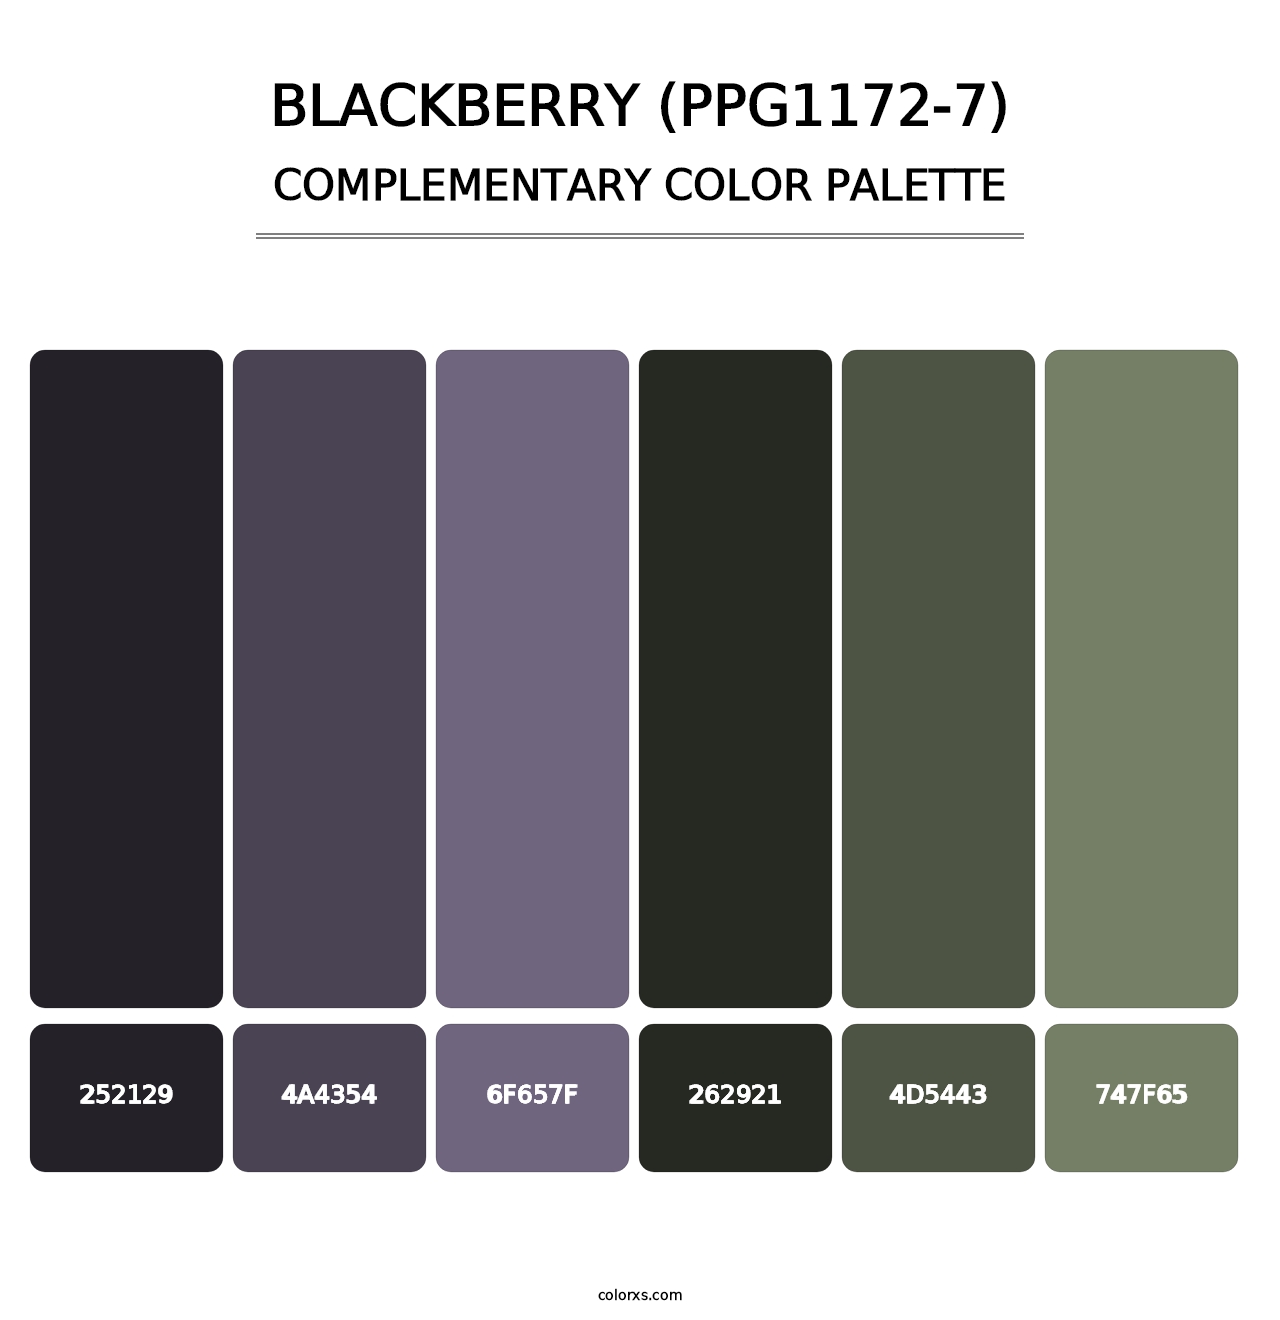 Blackberry (PPG1172-7) - Complementary Color Palette